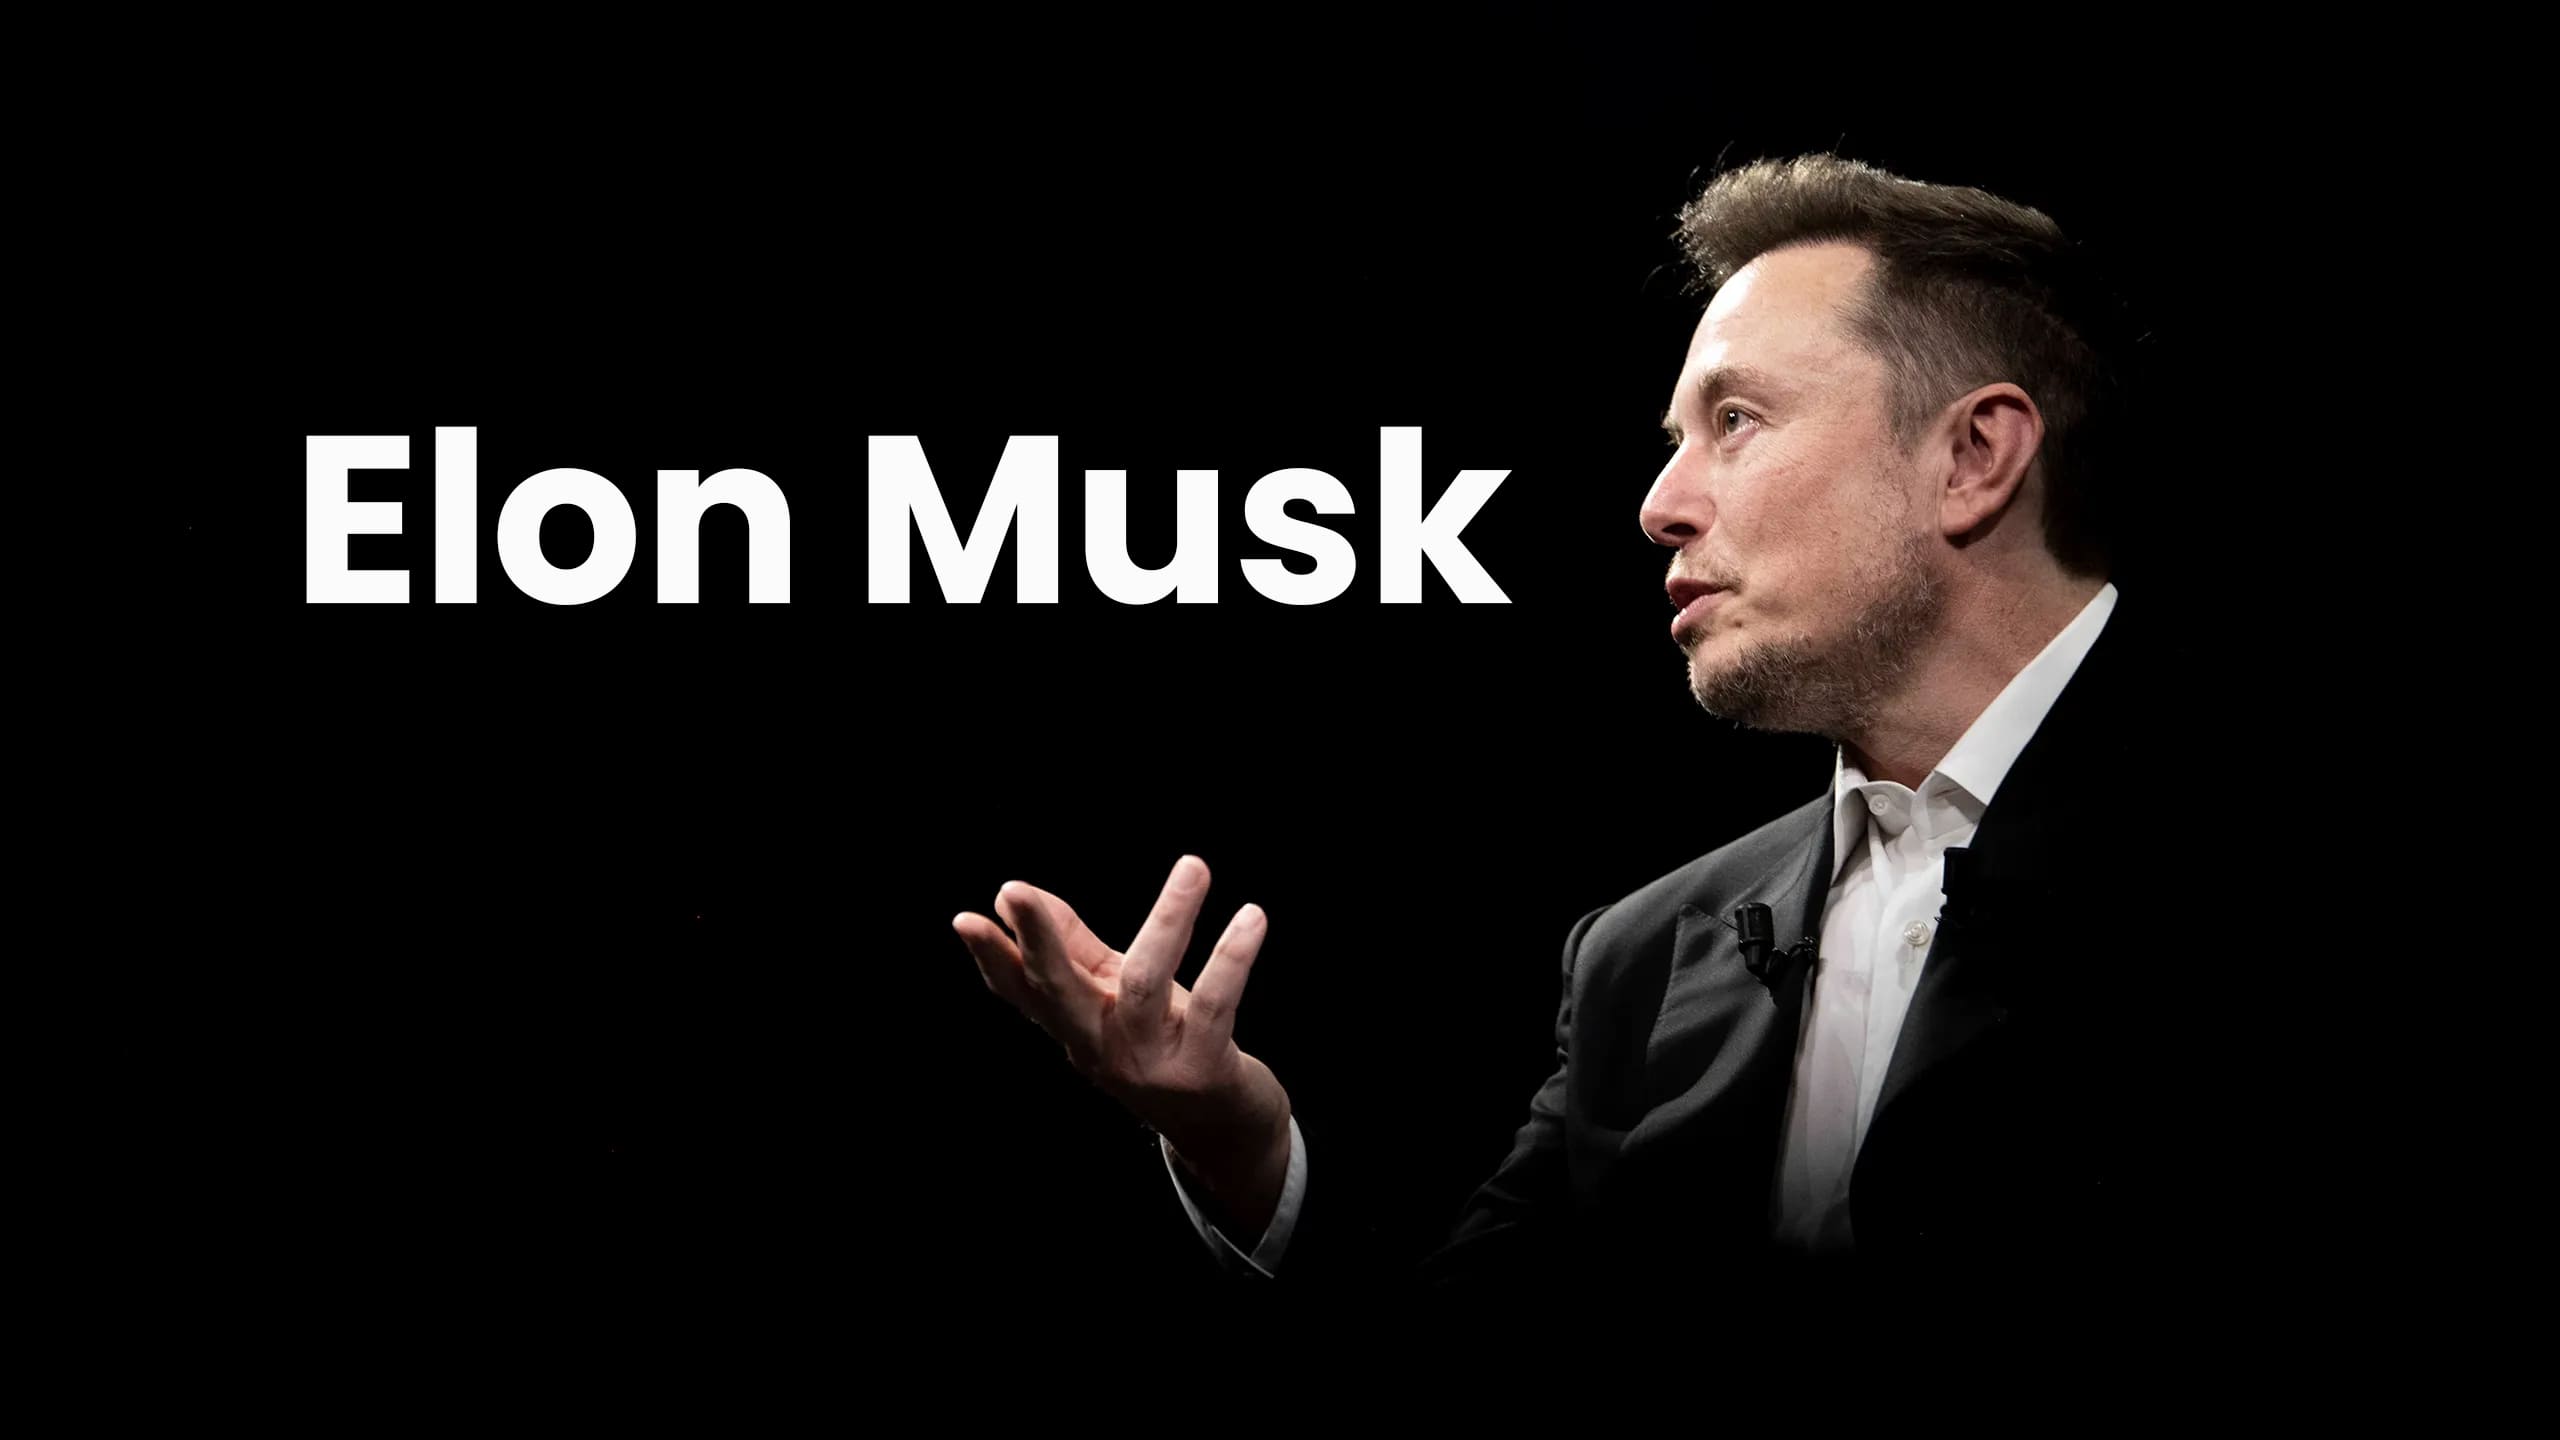 Elon Musk: A Visionary Innovator Reshaping the Future